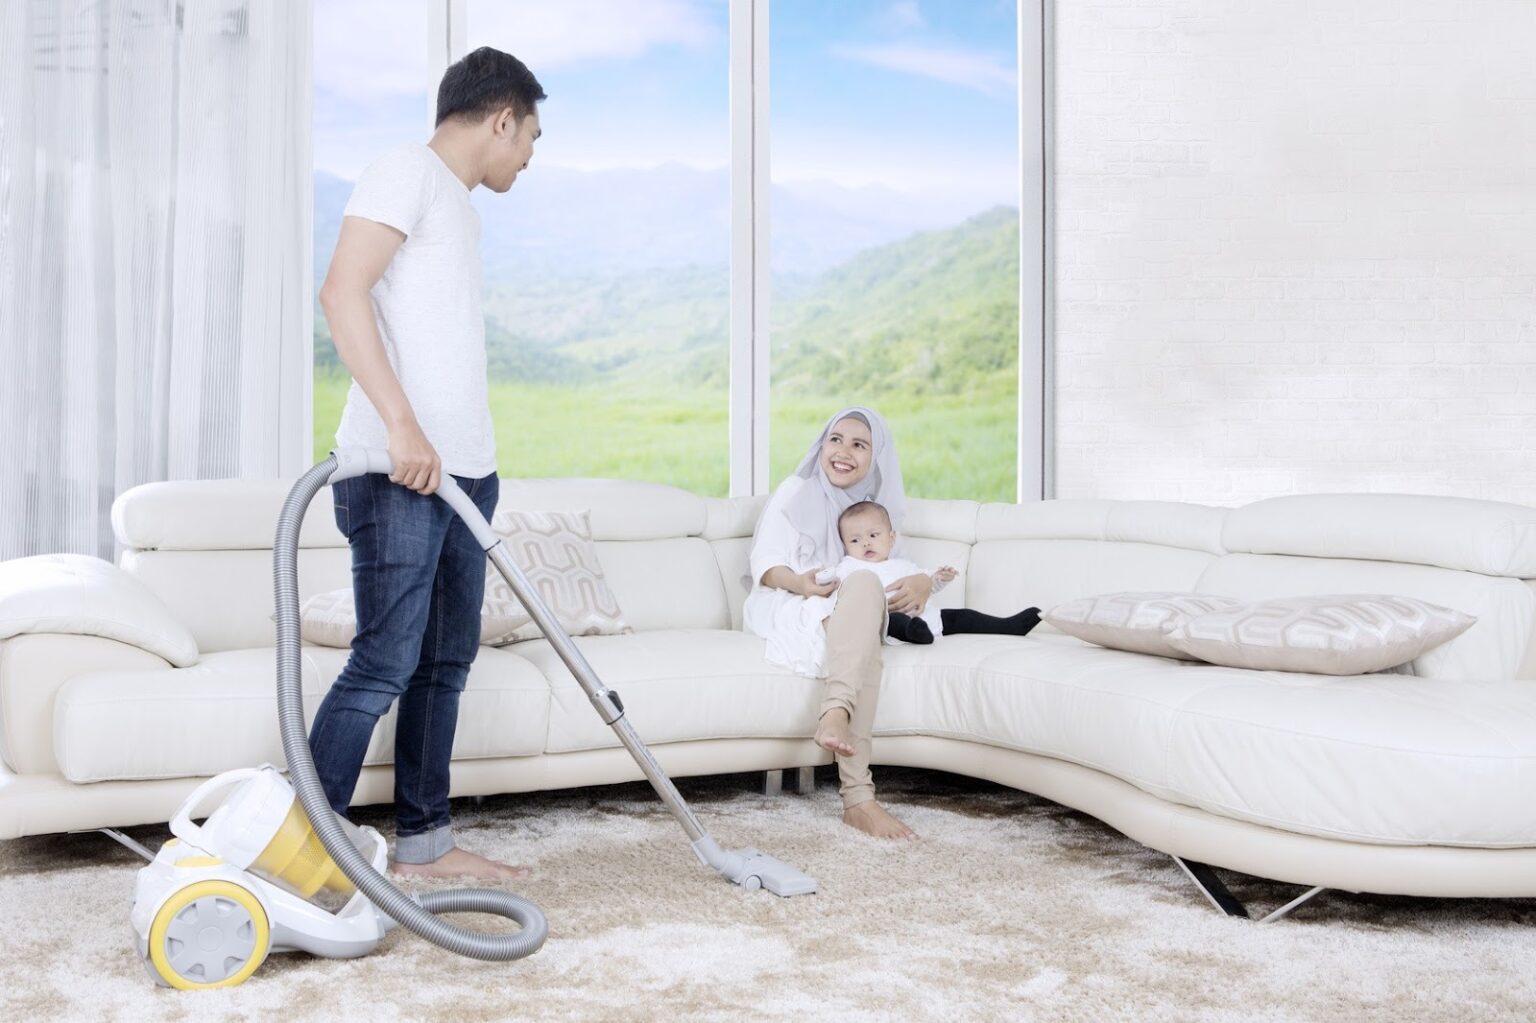 7 Signs It's Time to Call a Carpet Cleaning Service